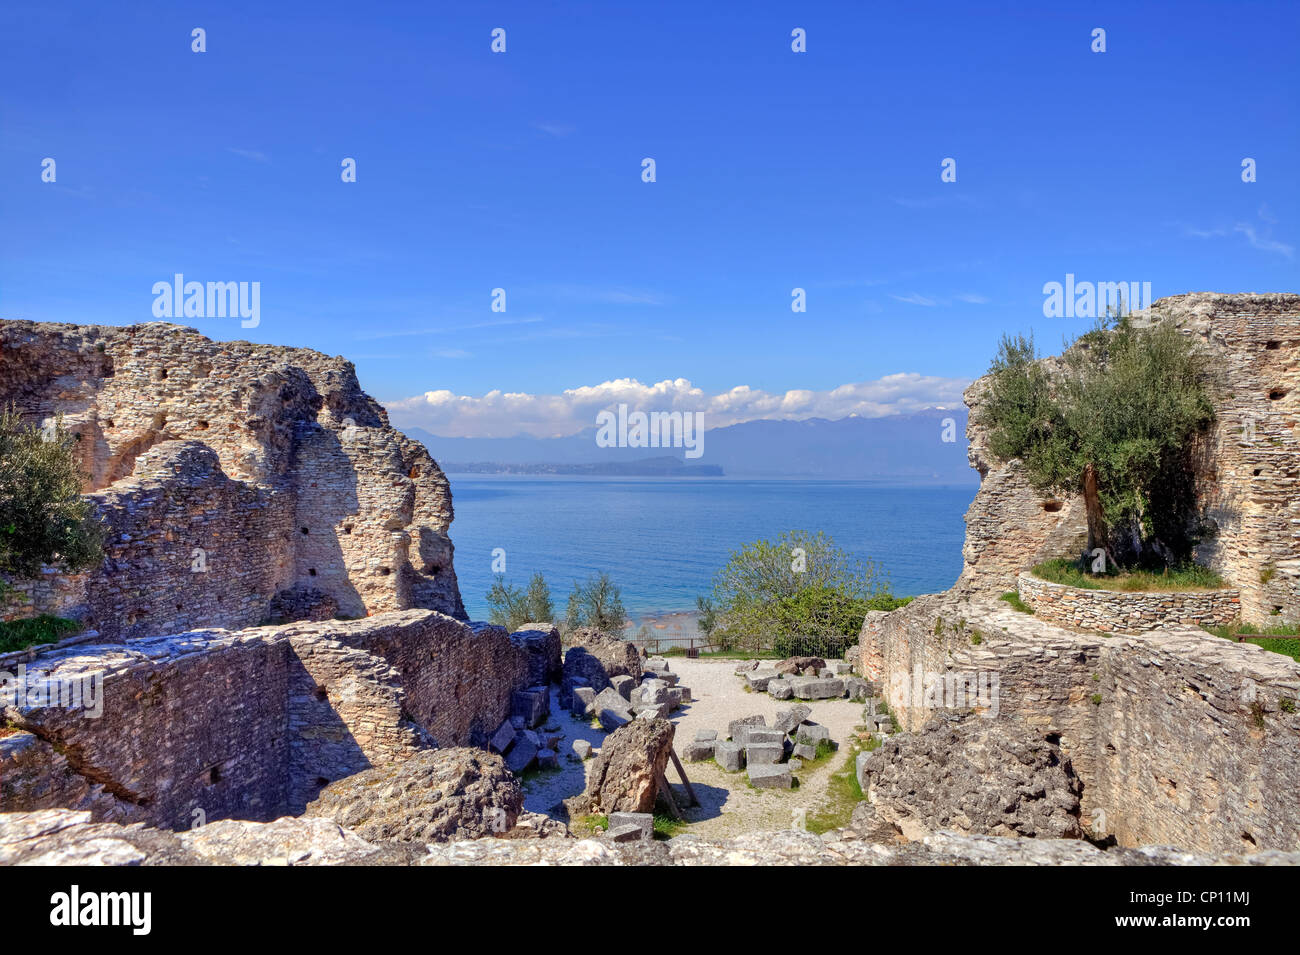 Grottoes of Catullus, Roman villa, Sirmione, Lombardy, Italy Stock Photo